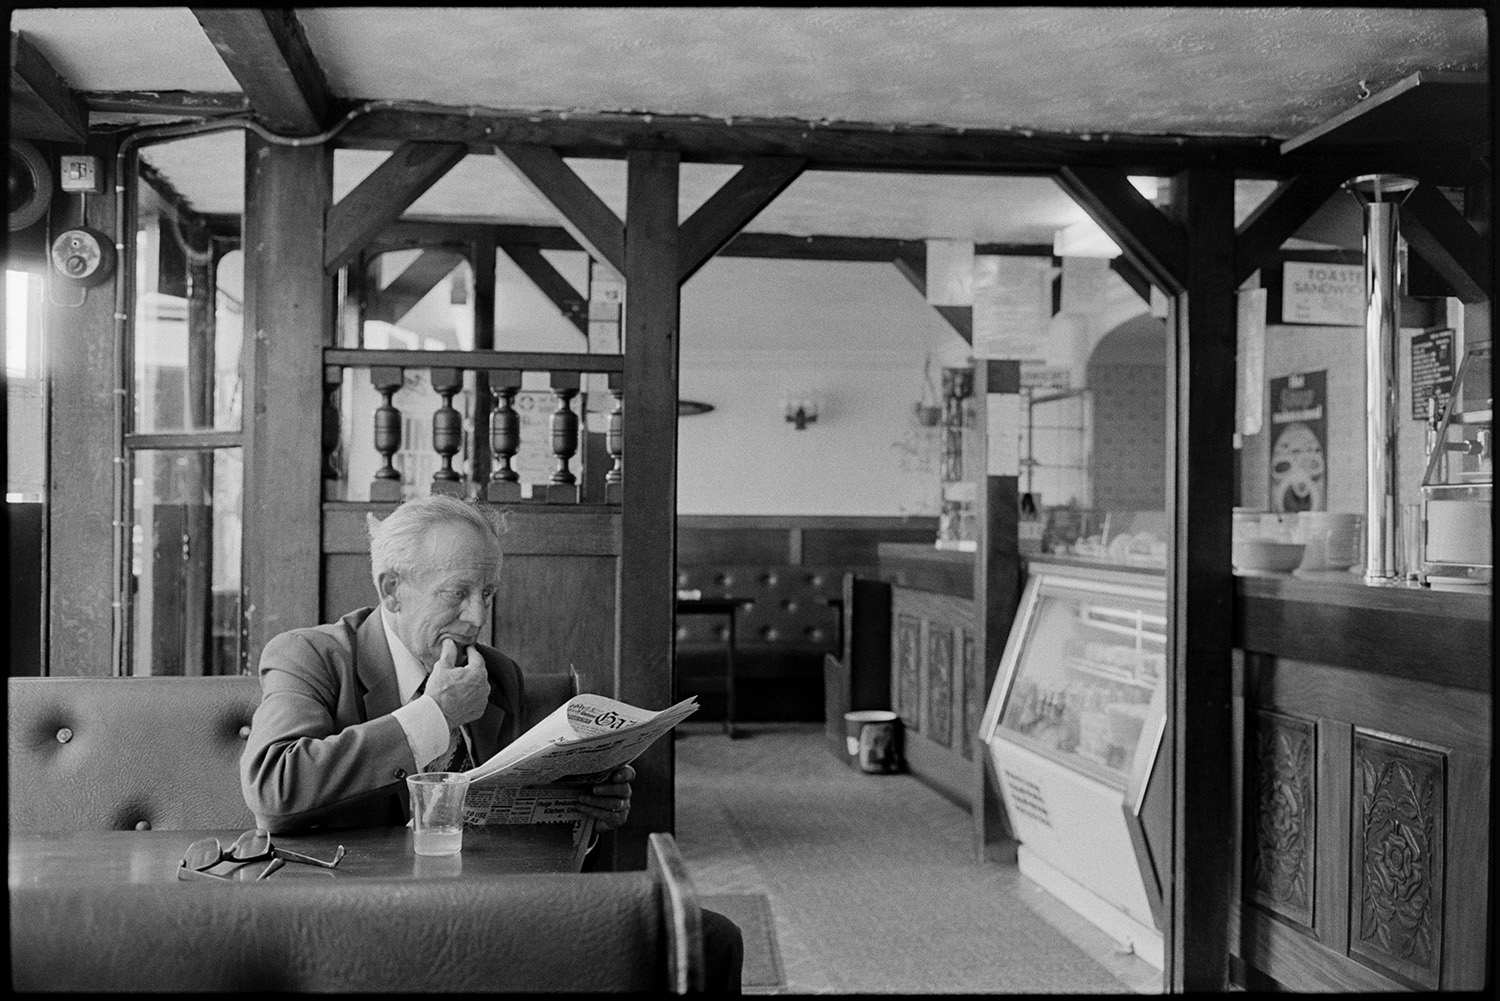 Man having drink and reading paper in cafe, restaurant. 
[A man reading a newspaper and having a drink at a table in a café in Mill Street, Bideford. The interior of the café is visible with a wooden panelled counter and wooden beams.]